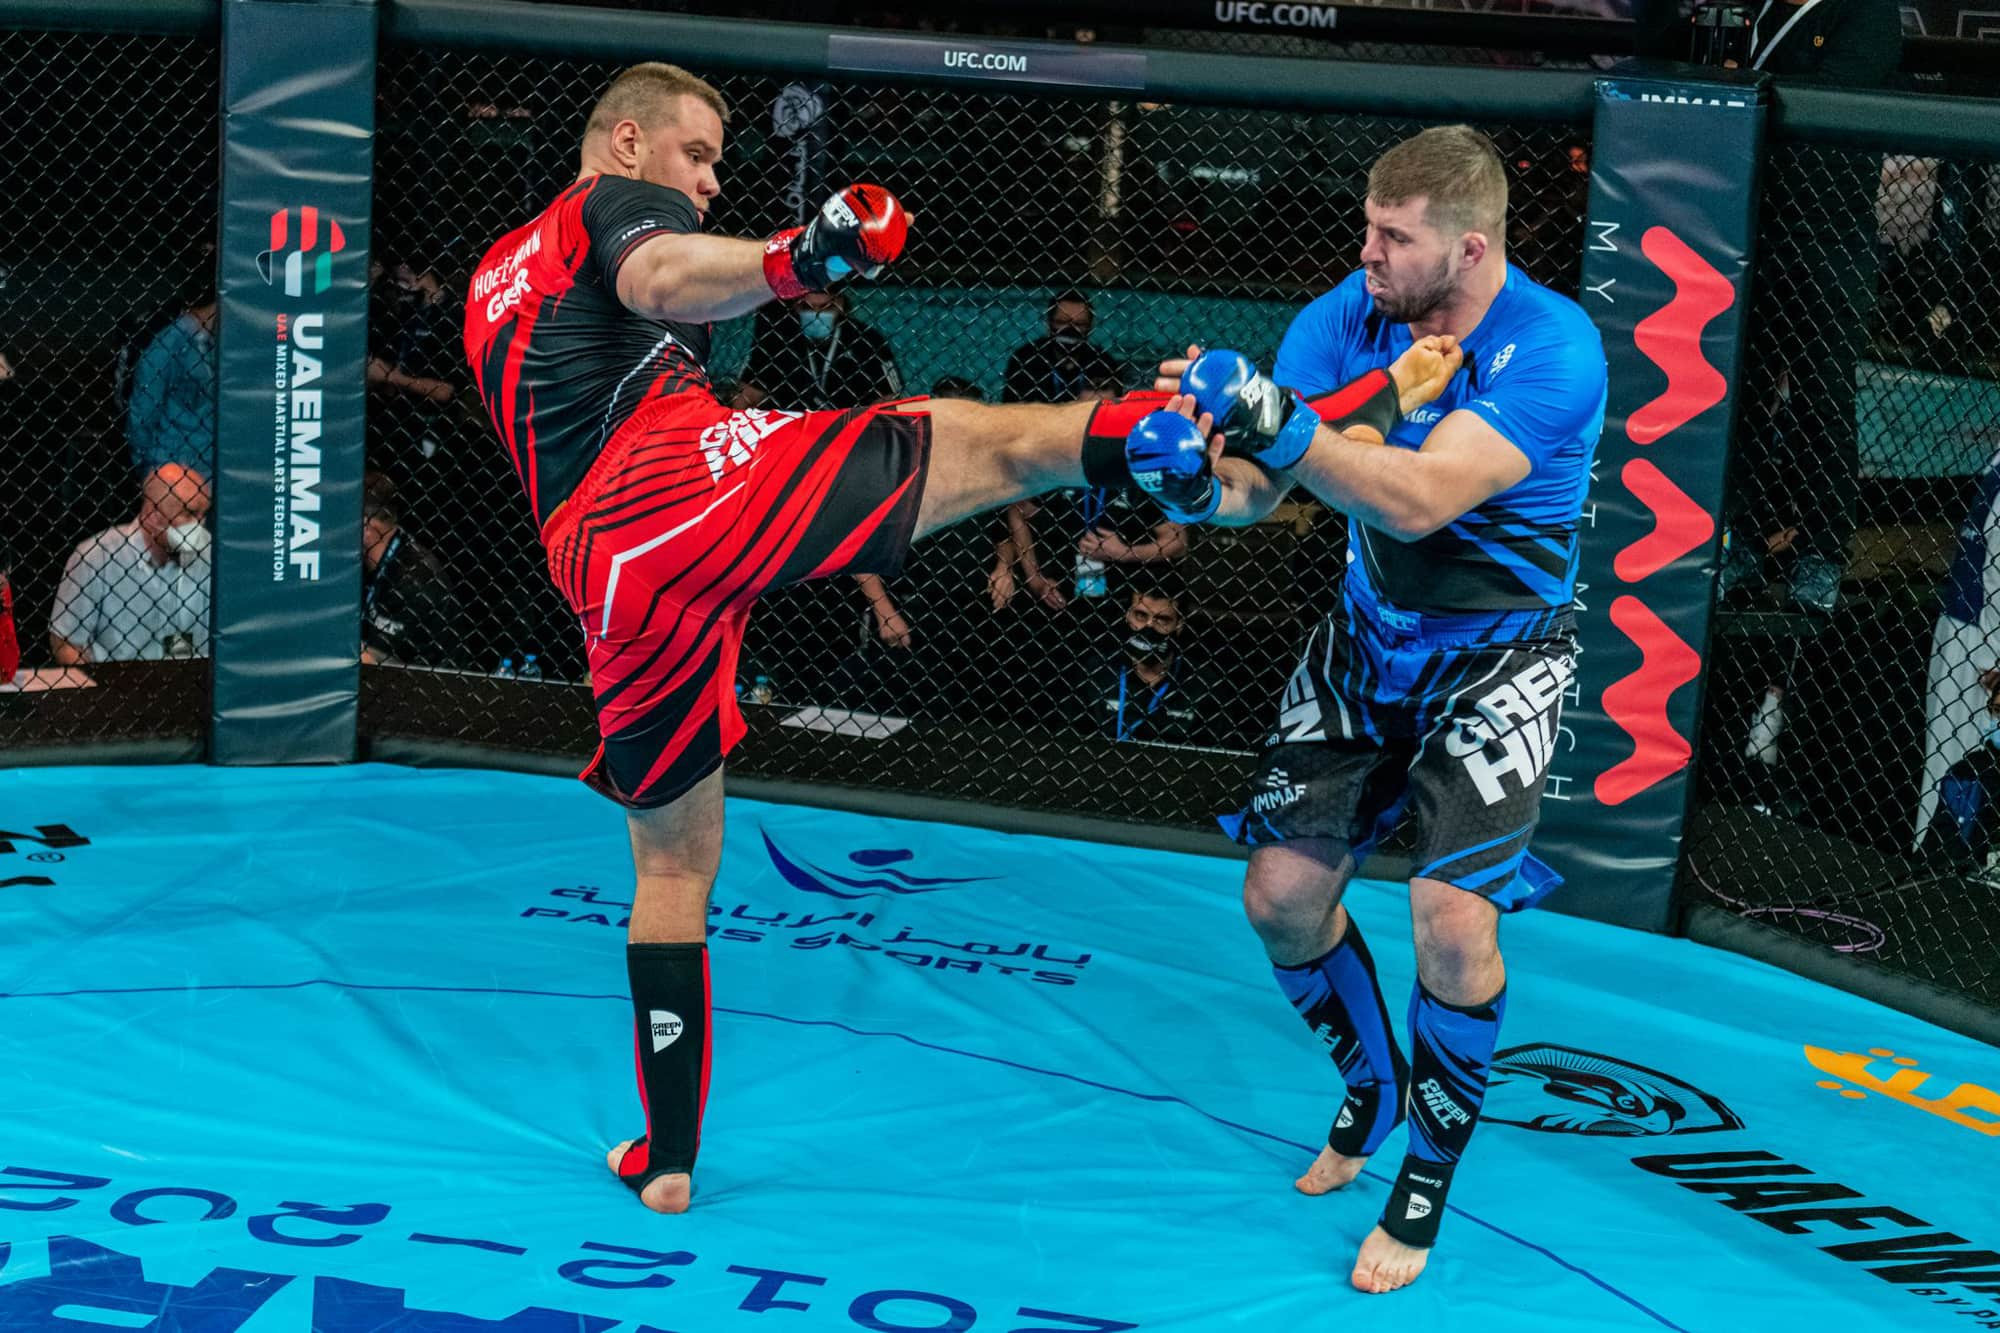 Kerrith Brown believes that mixed martial arts will grow in value as a result of this agreement ©IMMAF